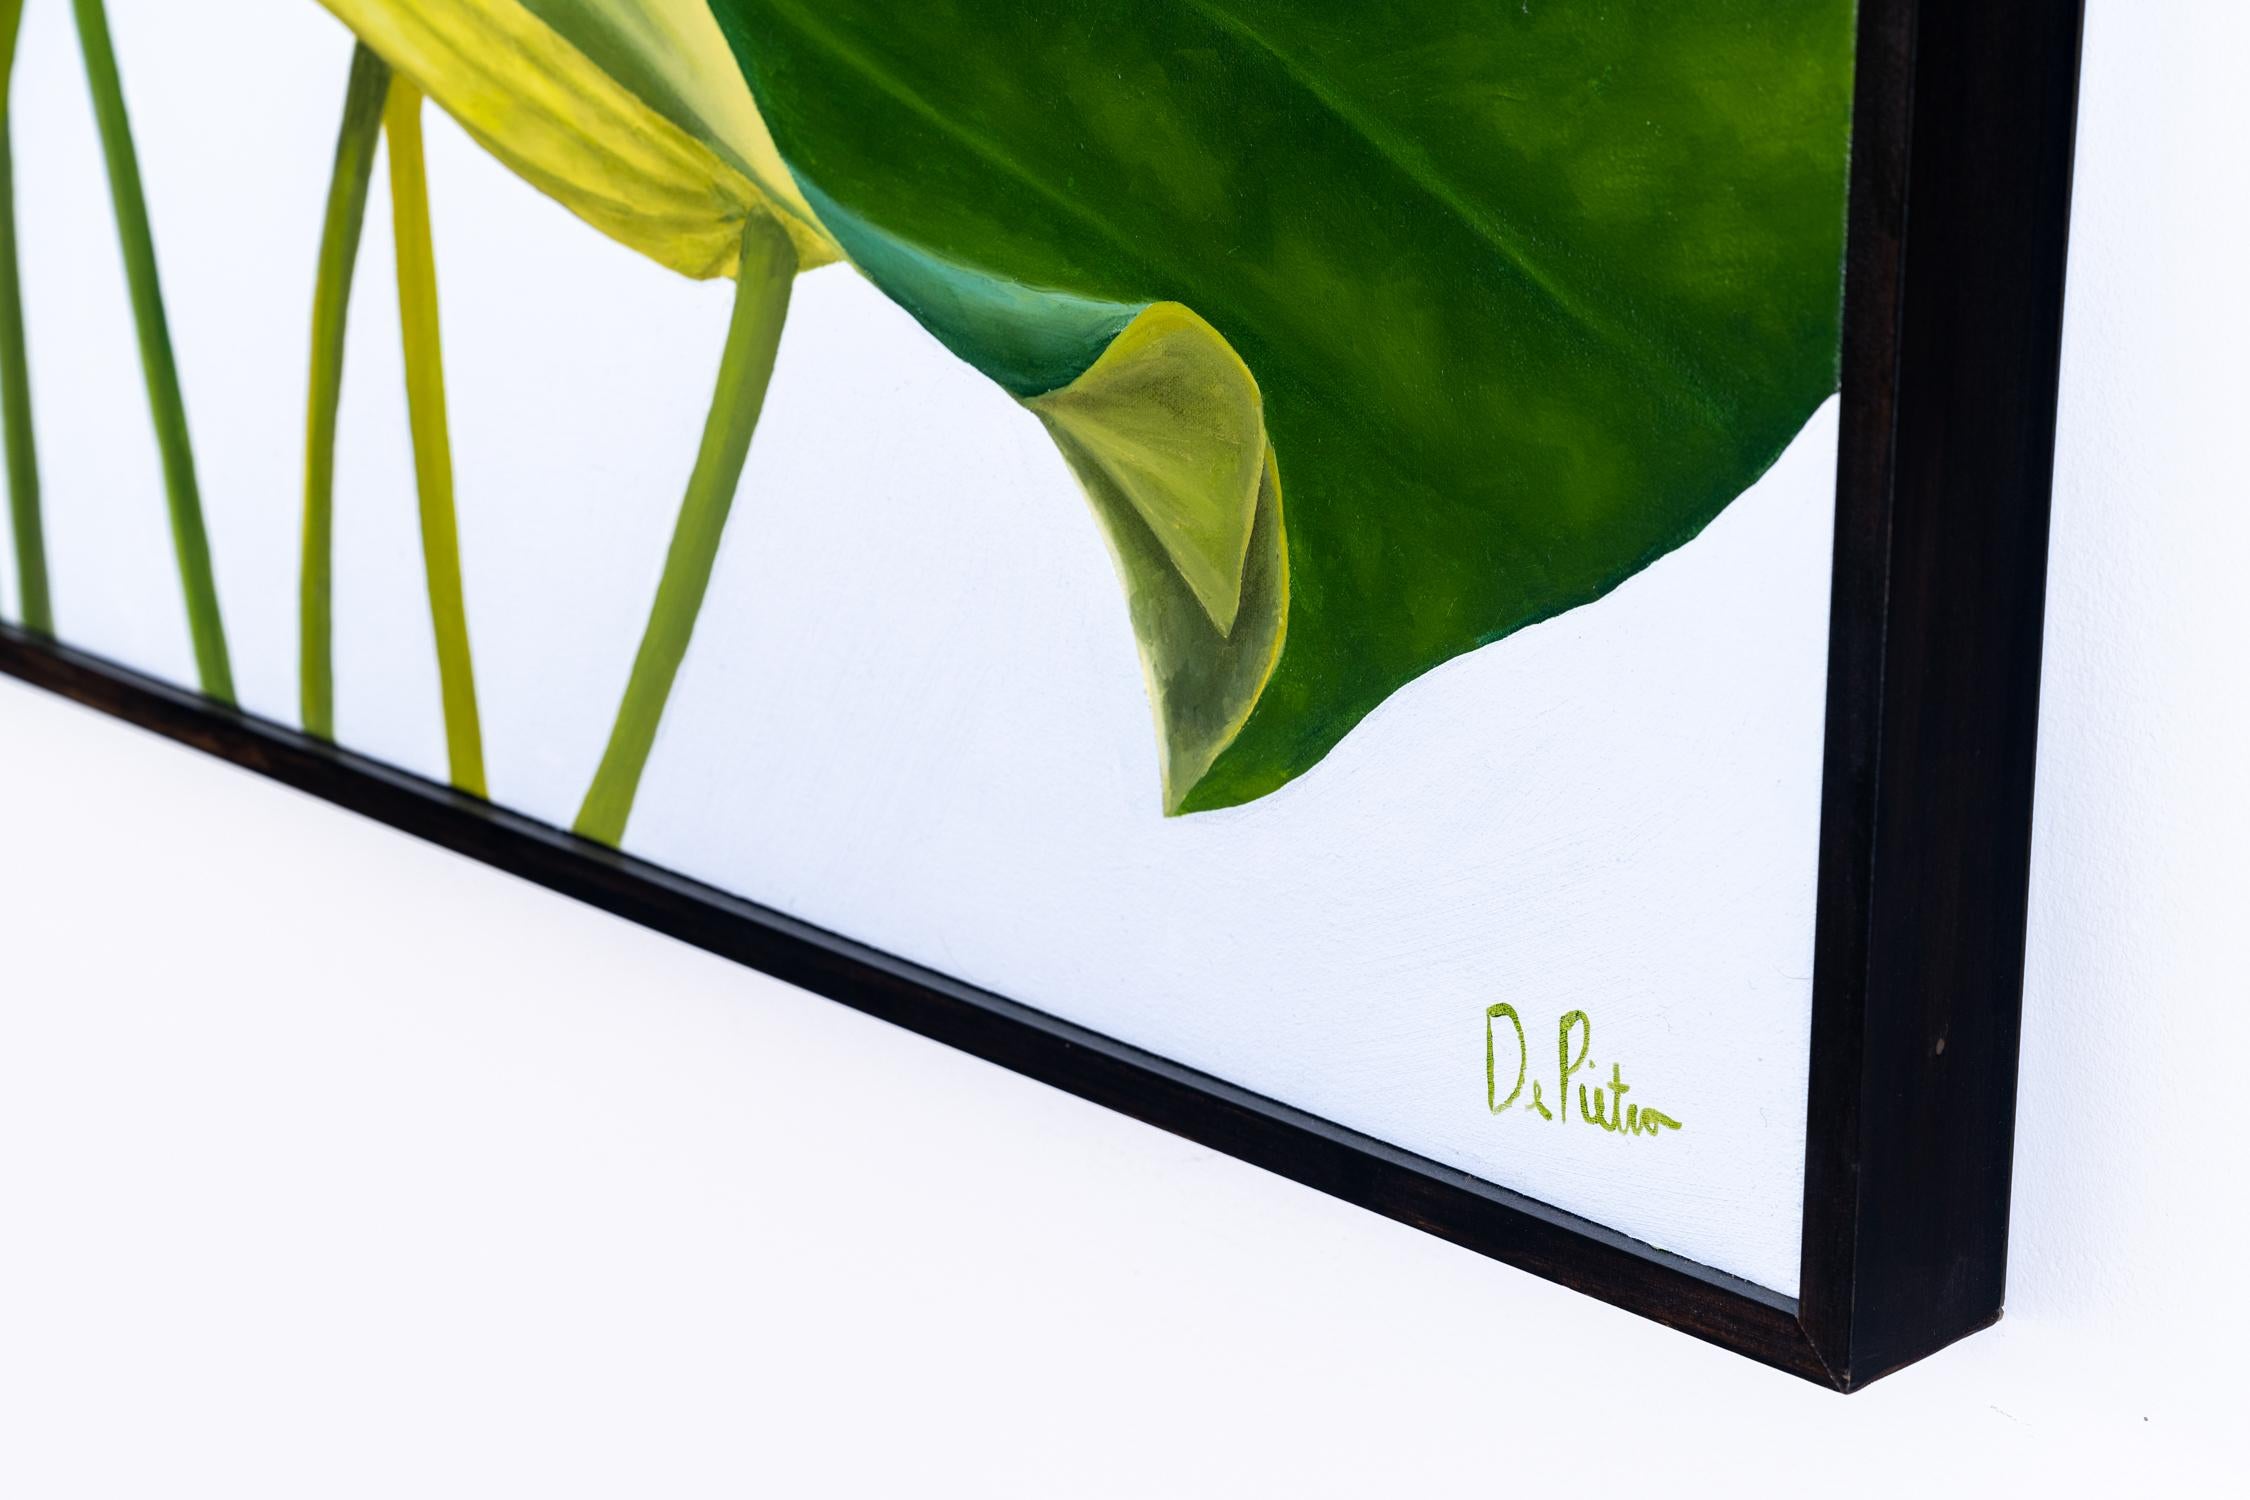 Photo-realist still life painting of lush green lotus plants on a soft grey sky background
